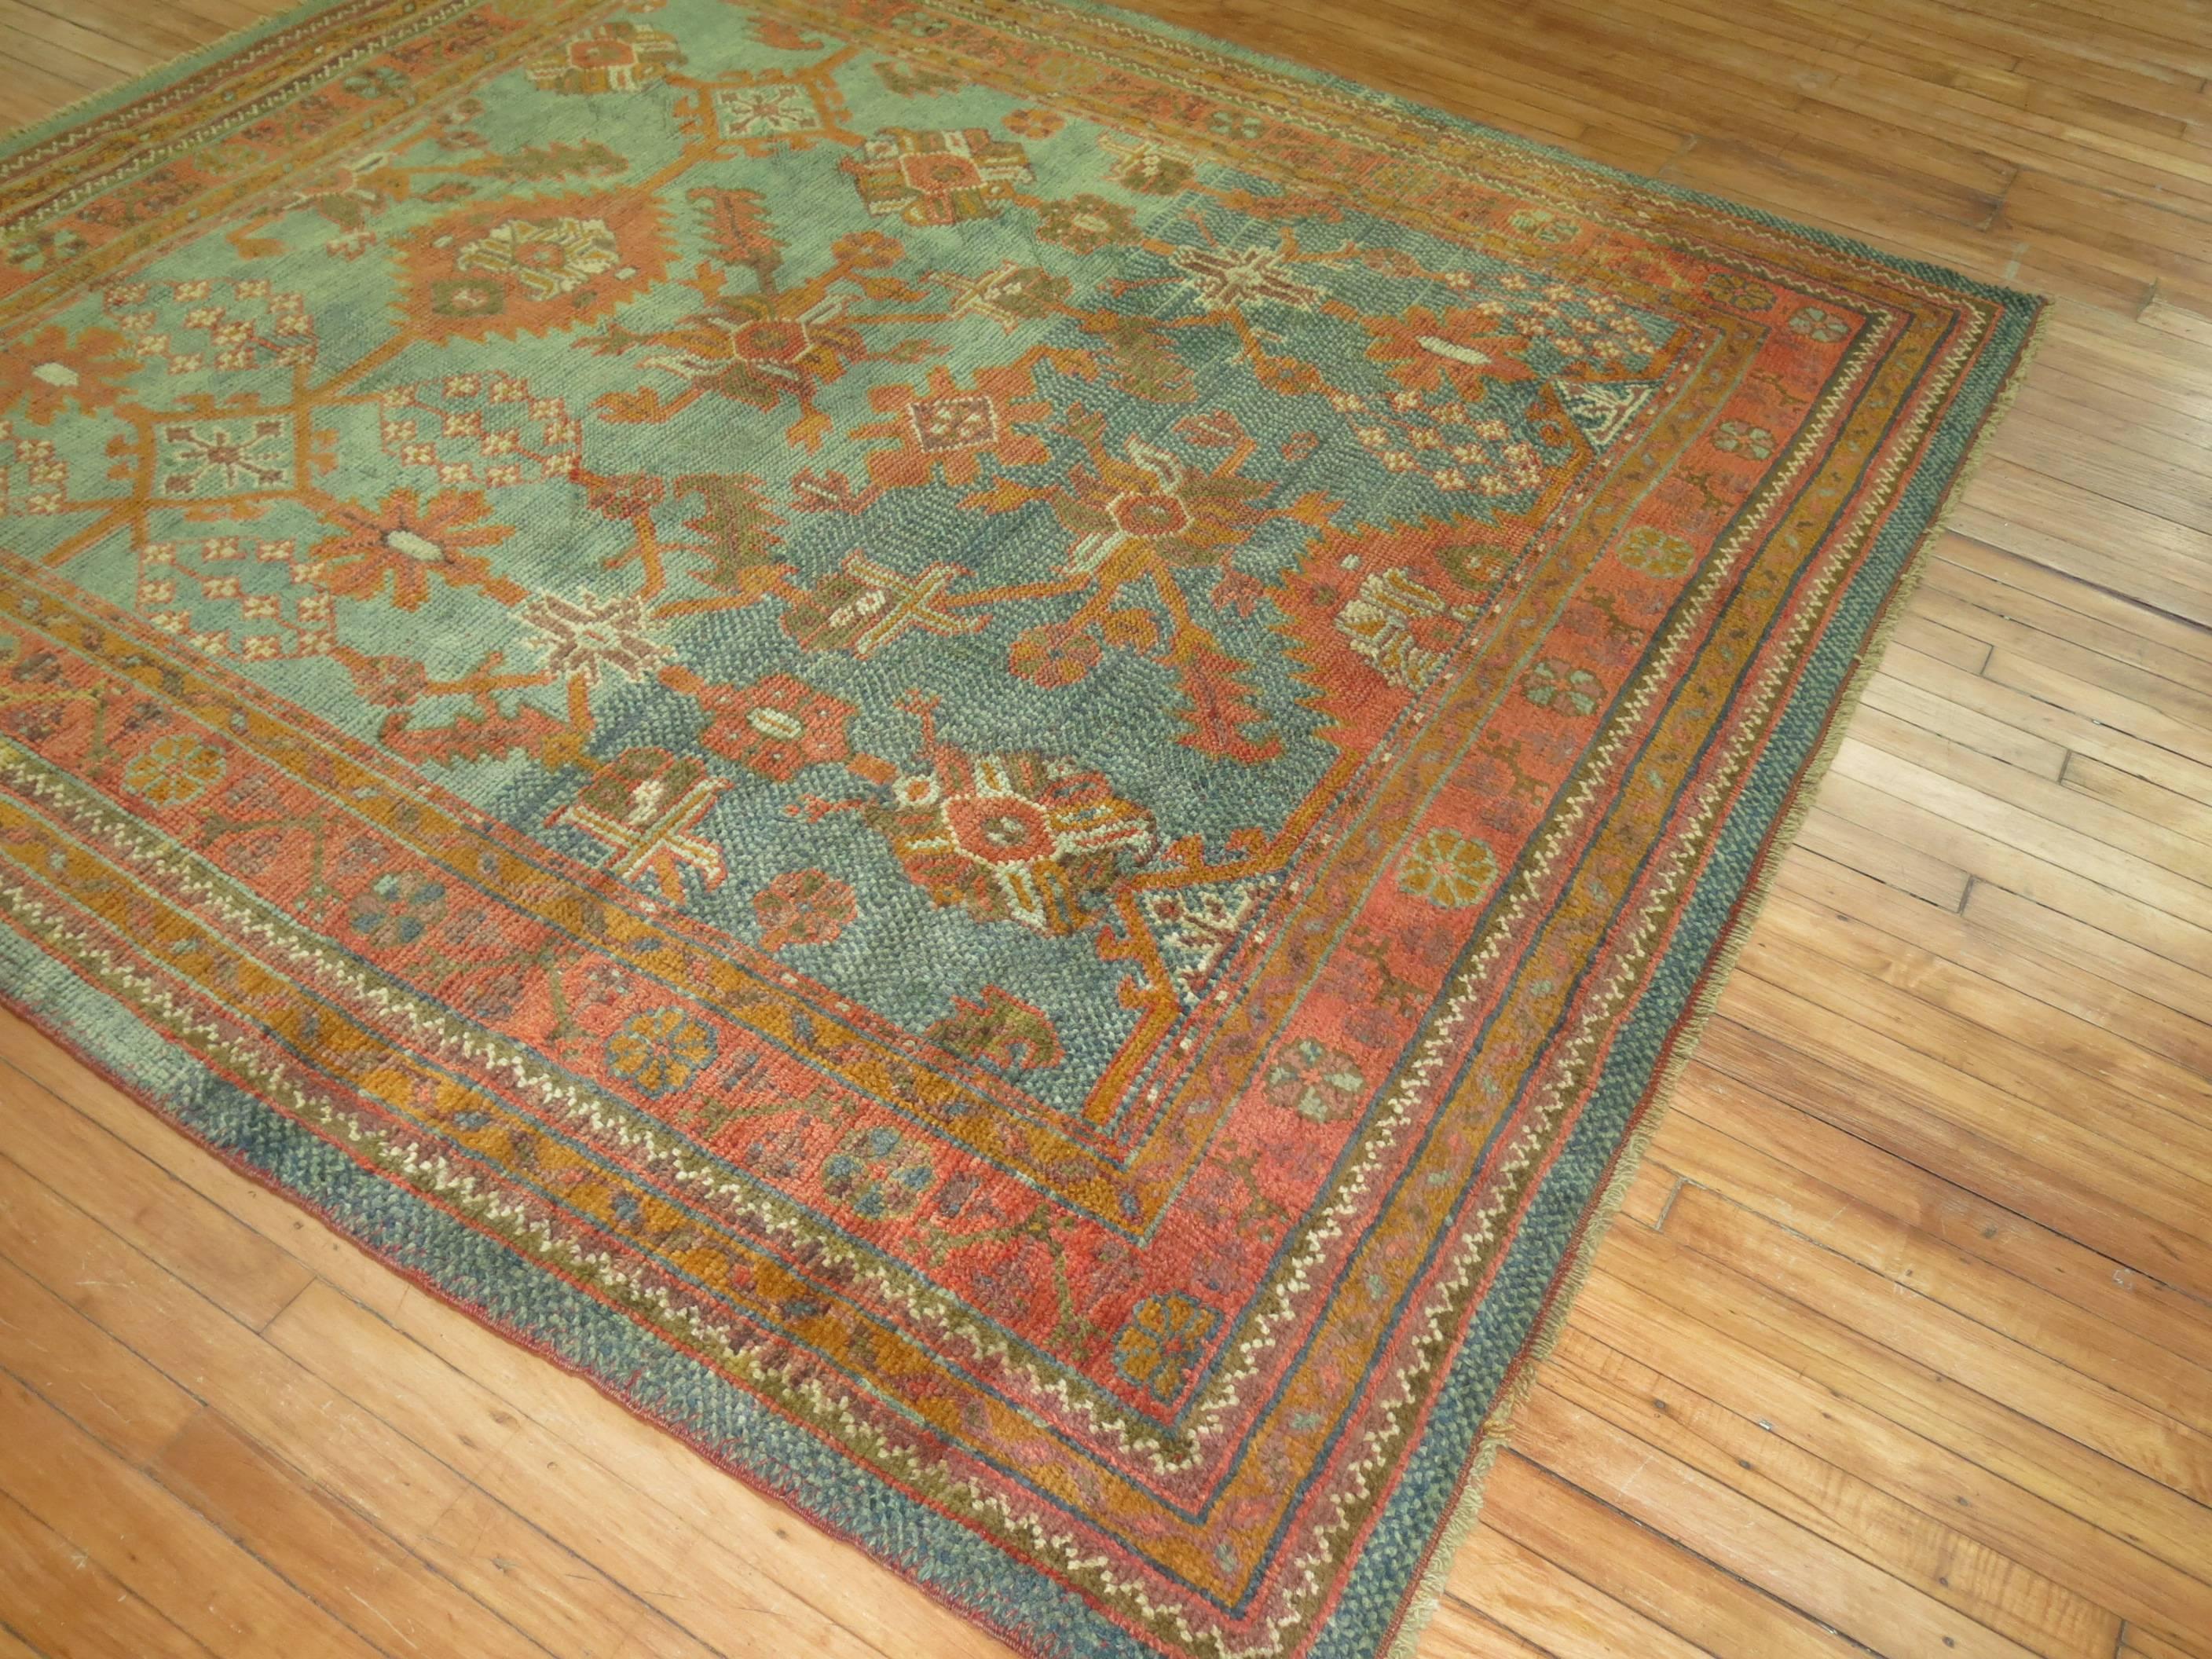 Rare size abrashed antique Oushak rug in oranges and green.

7' x 7'9''